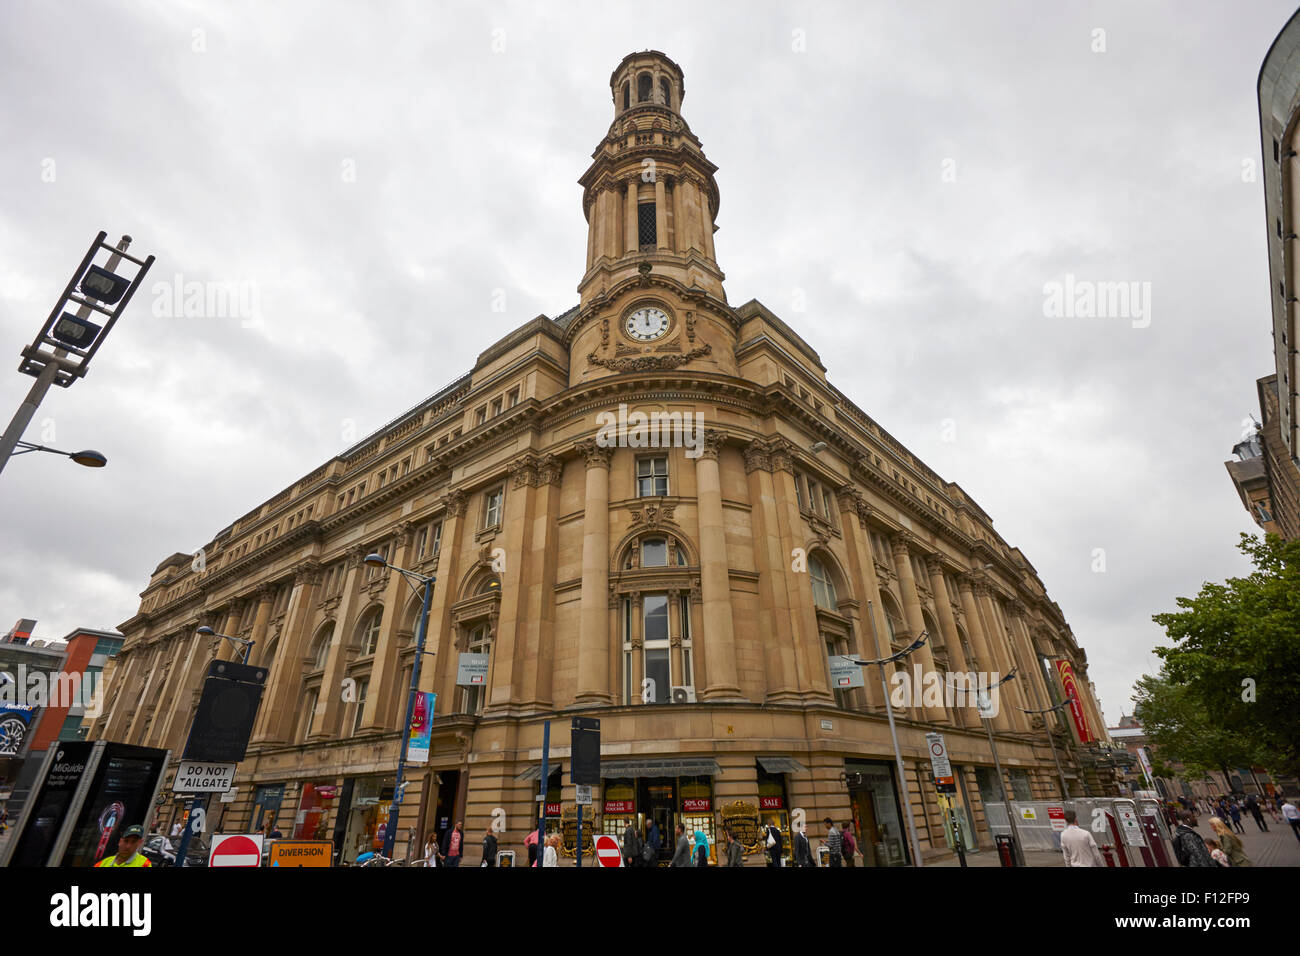 Royal Exchange building Manchester Inghilterra England Regno Unito Foto Stock